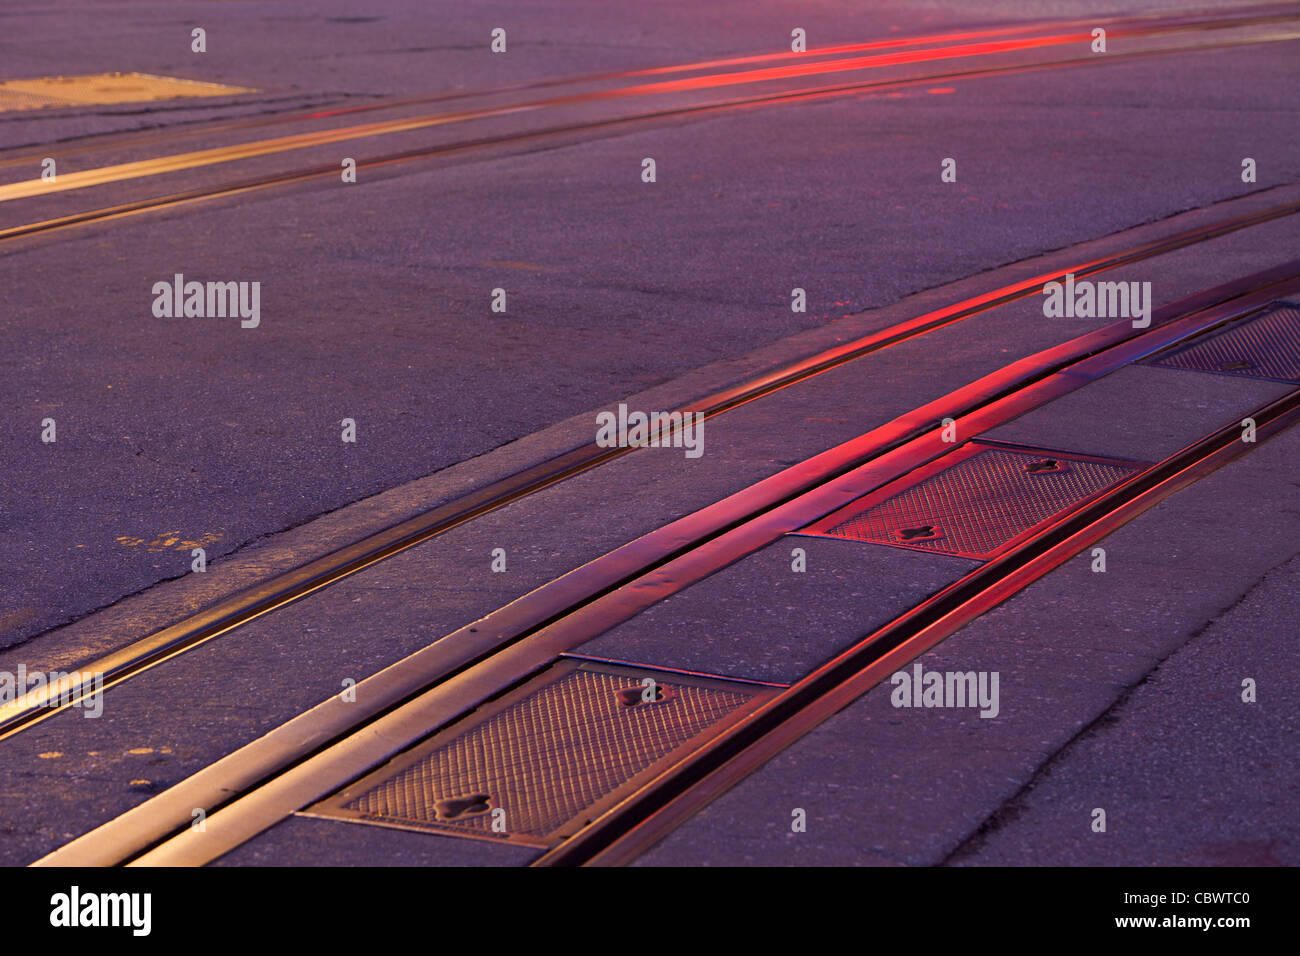 San Francisco historic cable car tracks at night with red and yellow neon light reflections Stock Photo